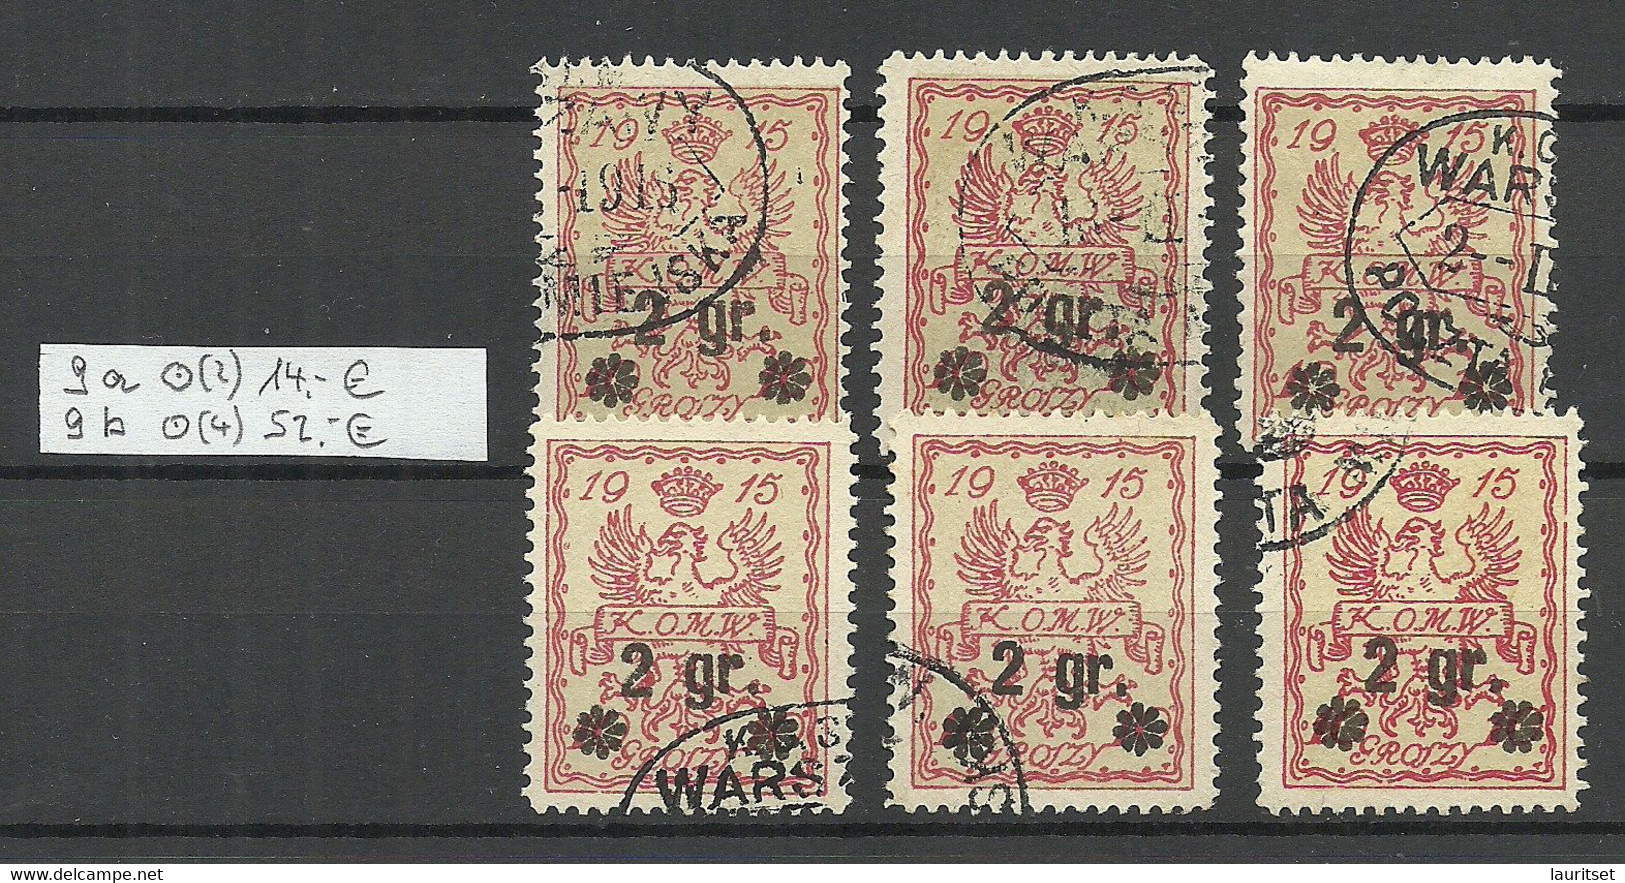 POLEN Poland 1916 Stadtpost Warschau Lot From Michel 9 A & 9 C O - Used Stamps